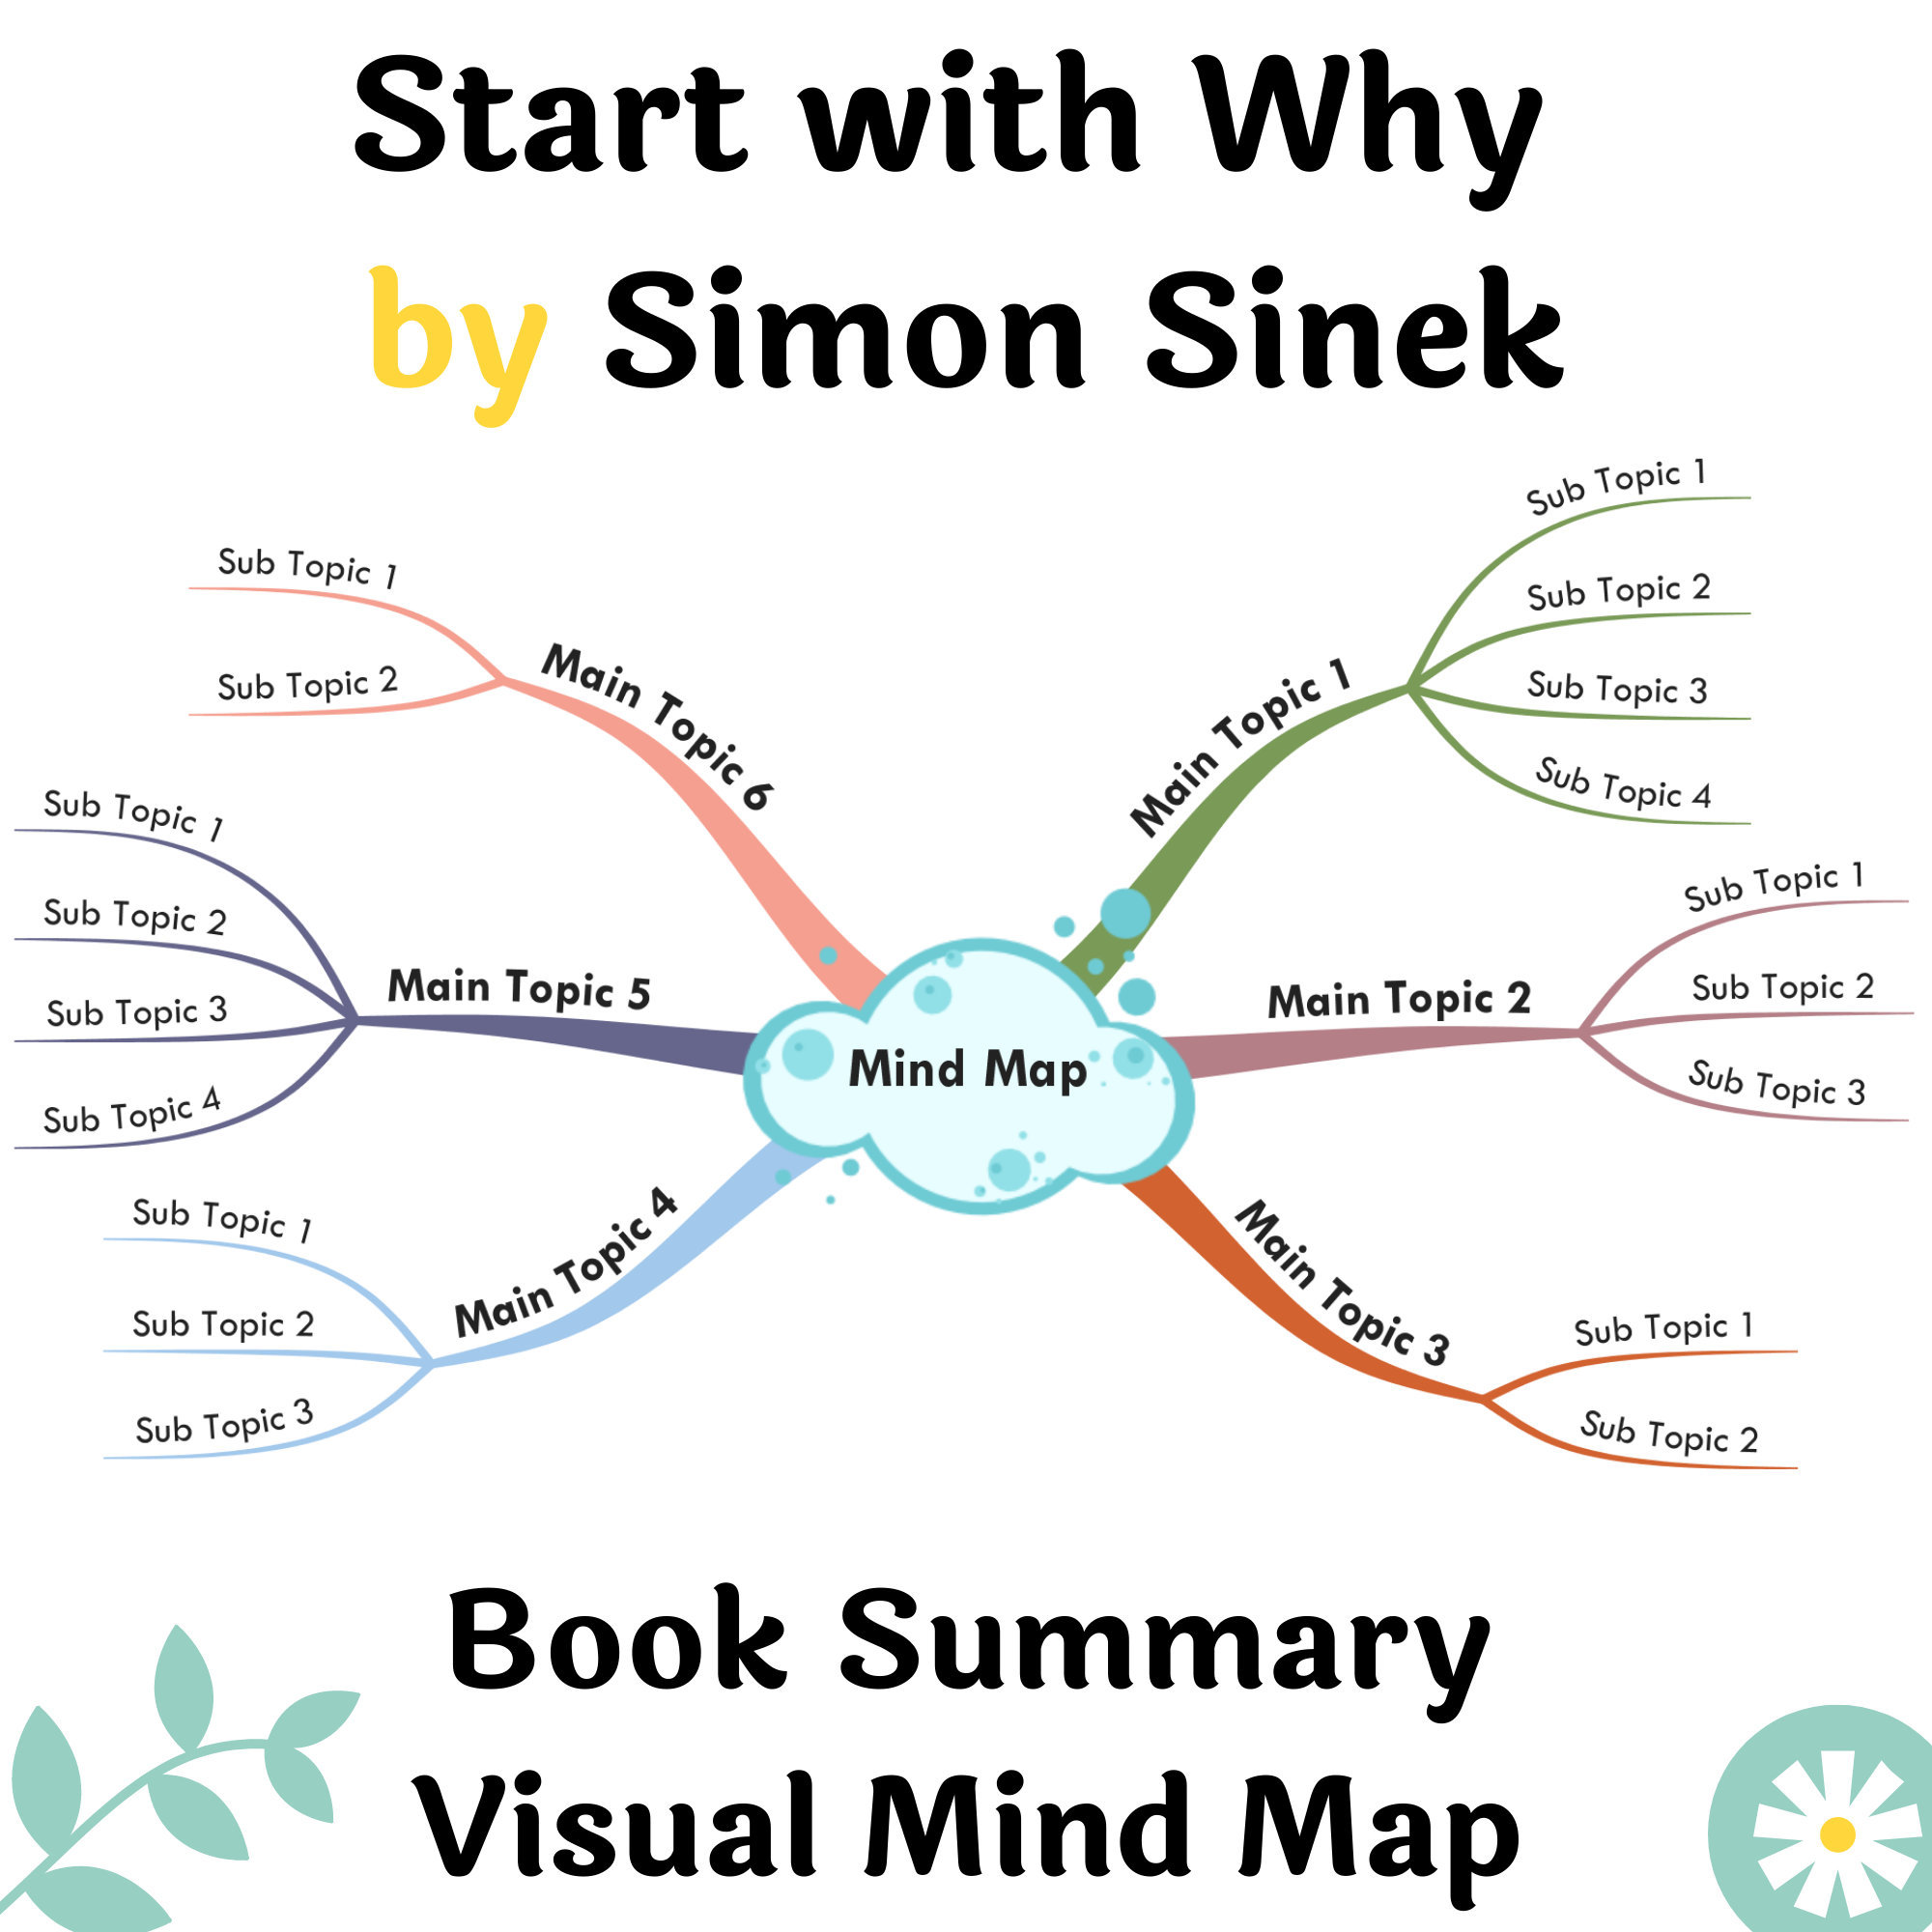 Book Summary Printable Mind Map - Start with why by Simon Sinek | A3, A2  Printable Mind Map